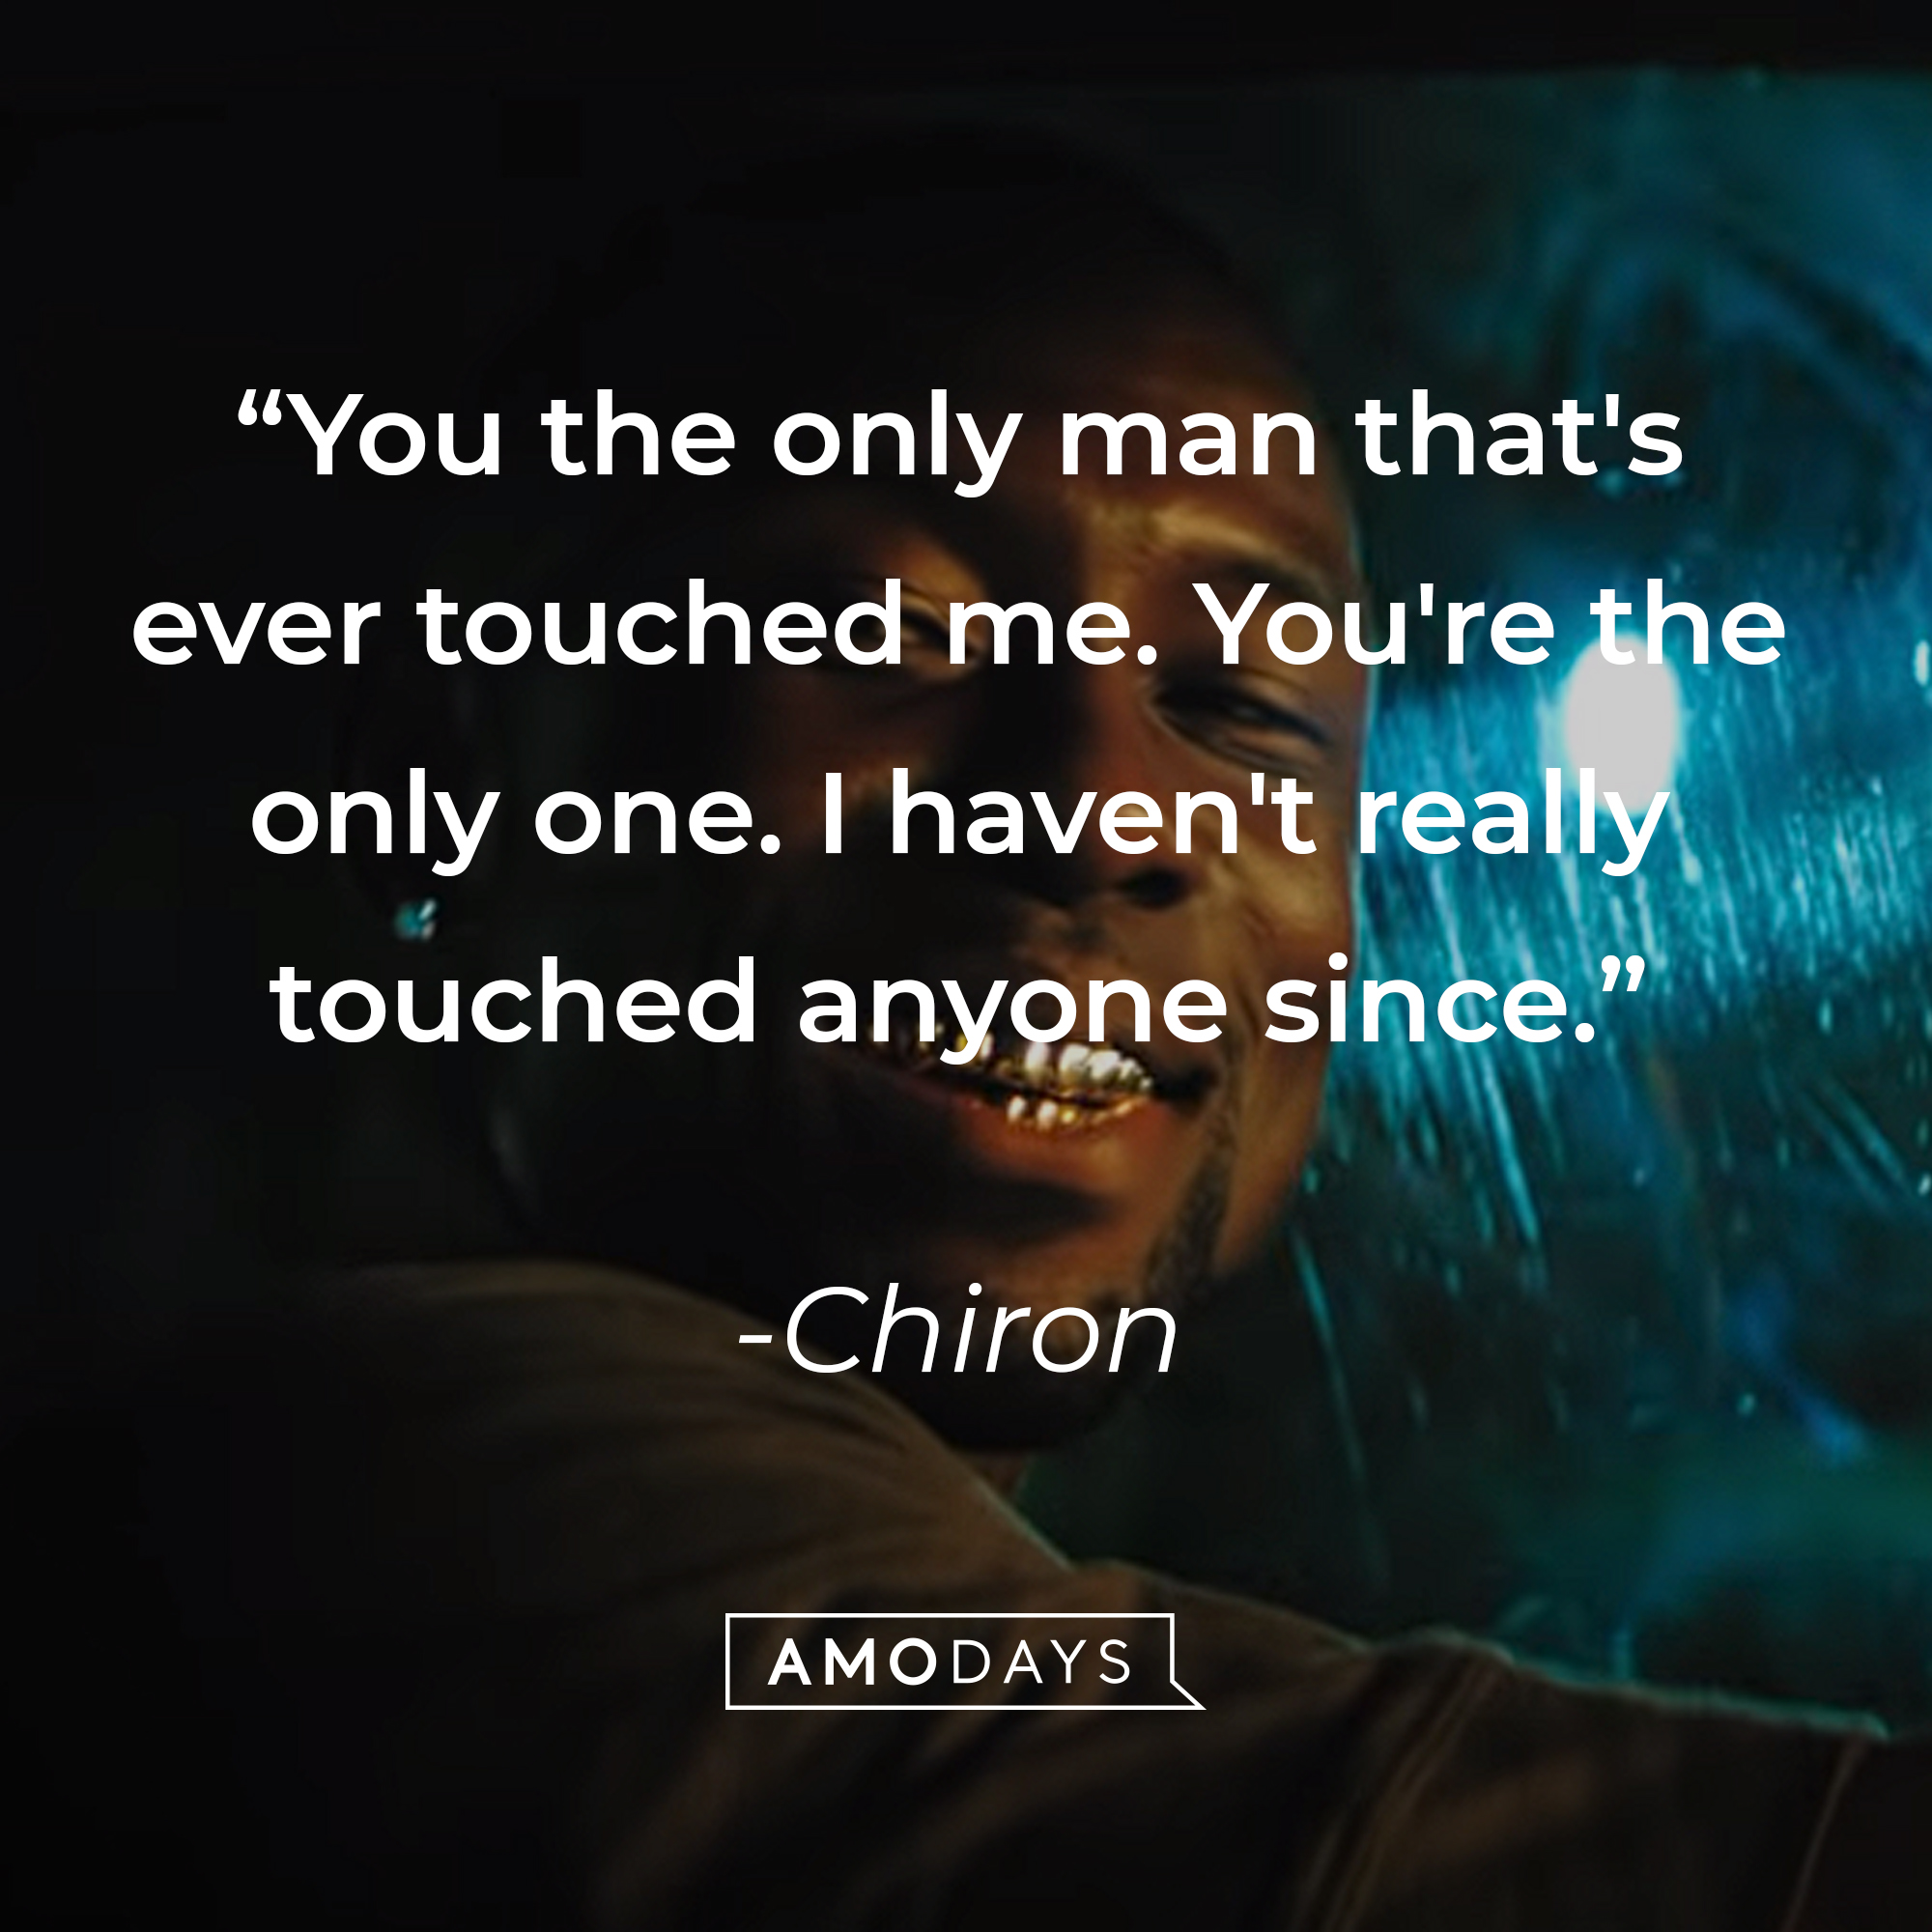 An image of Chiron with his quote: “You the only man that's ever touched me. You're the only one. I haven't really touched anyone since.” | Source: youtube.com/A24